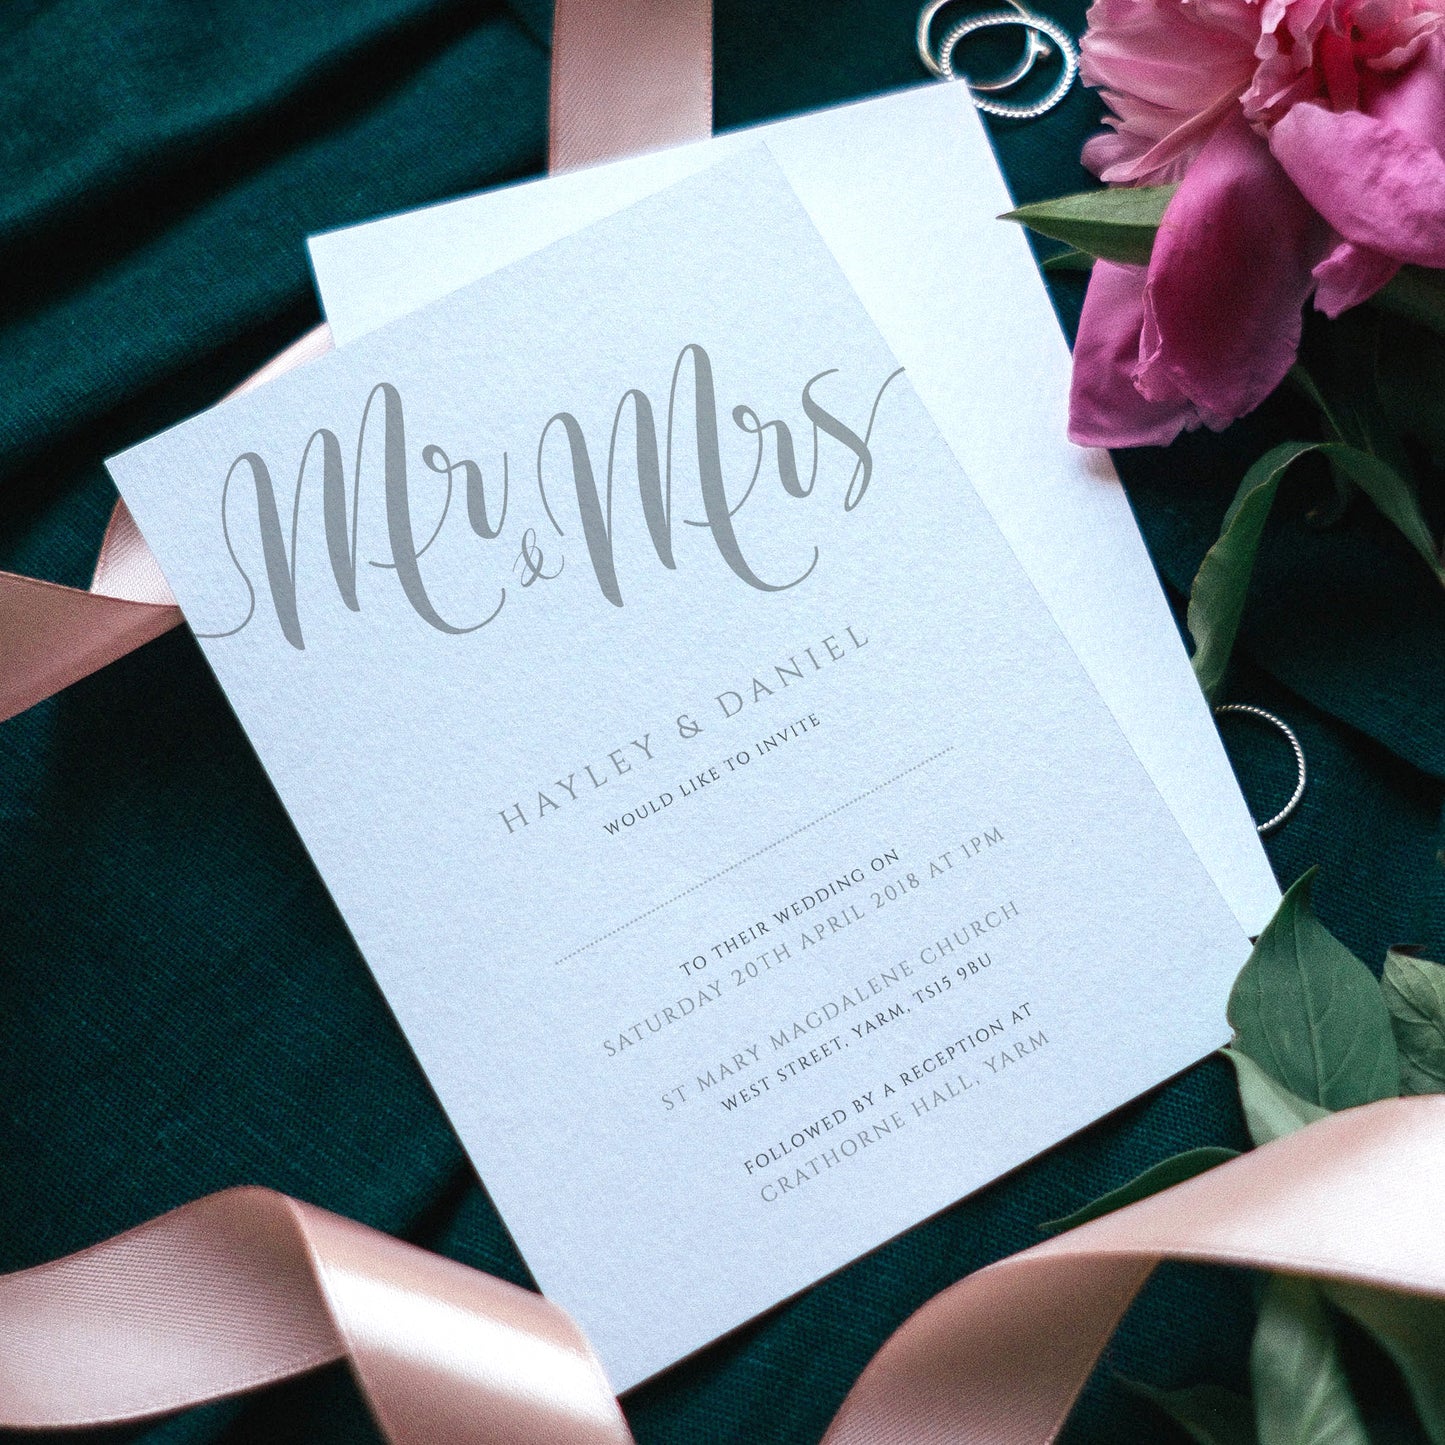 mr and mrs silver wedding invitations with flowers and ribbons